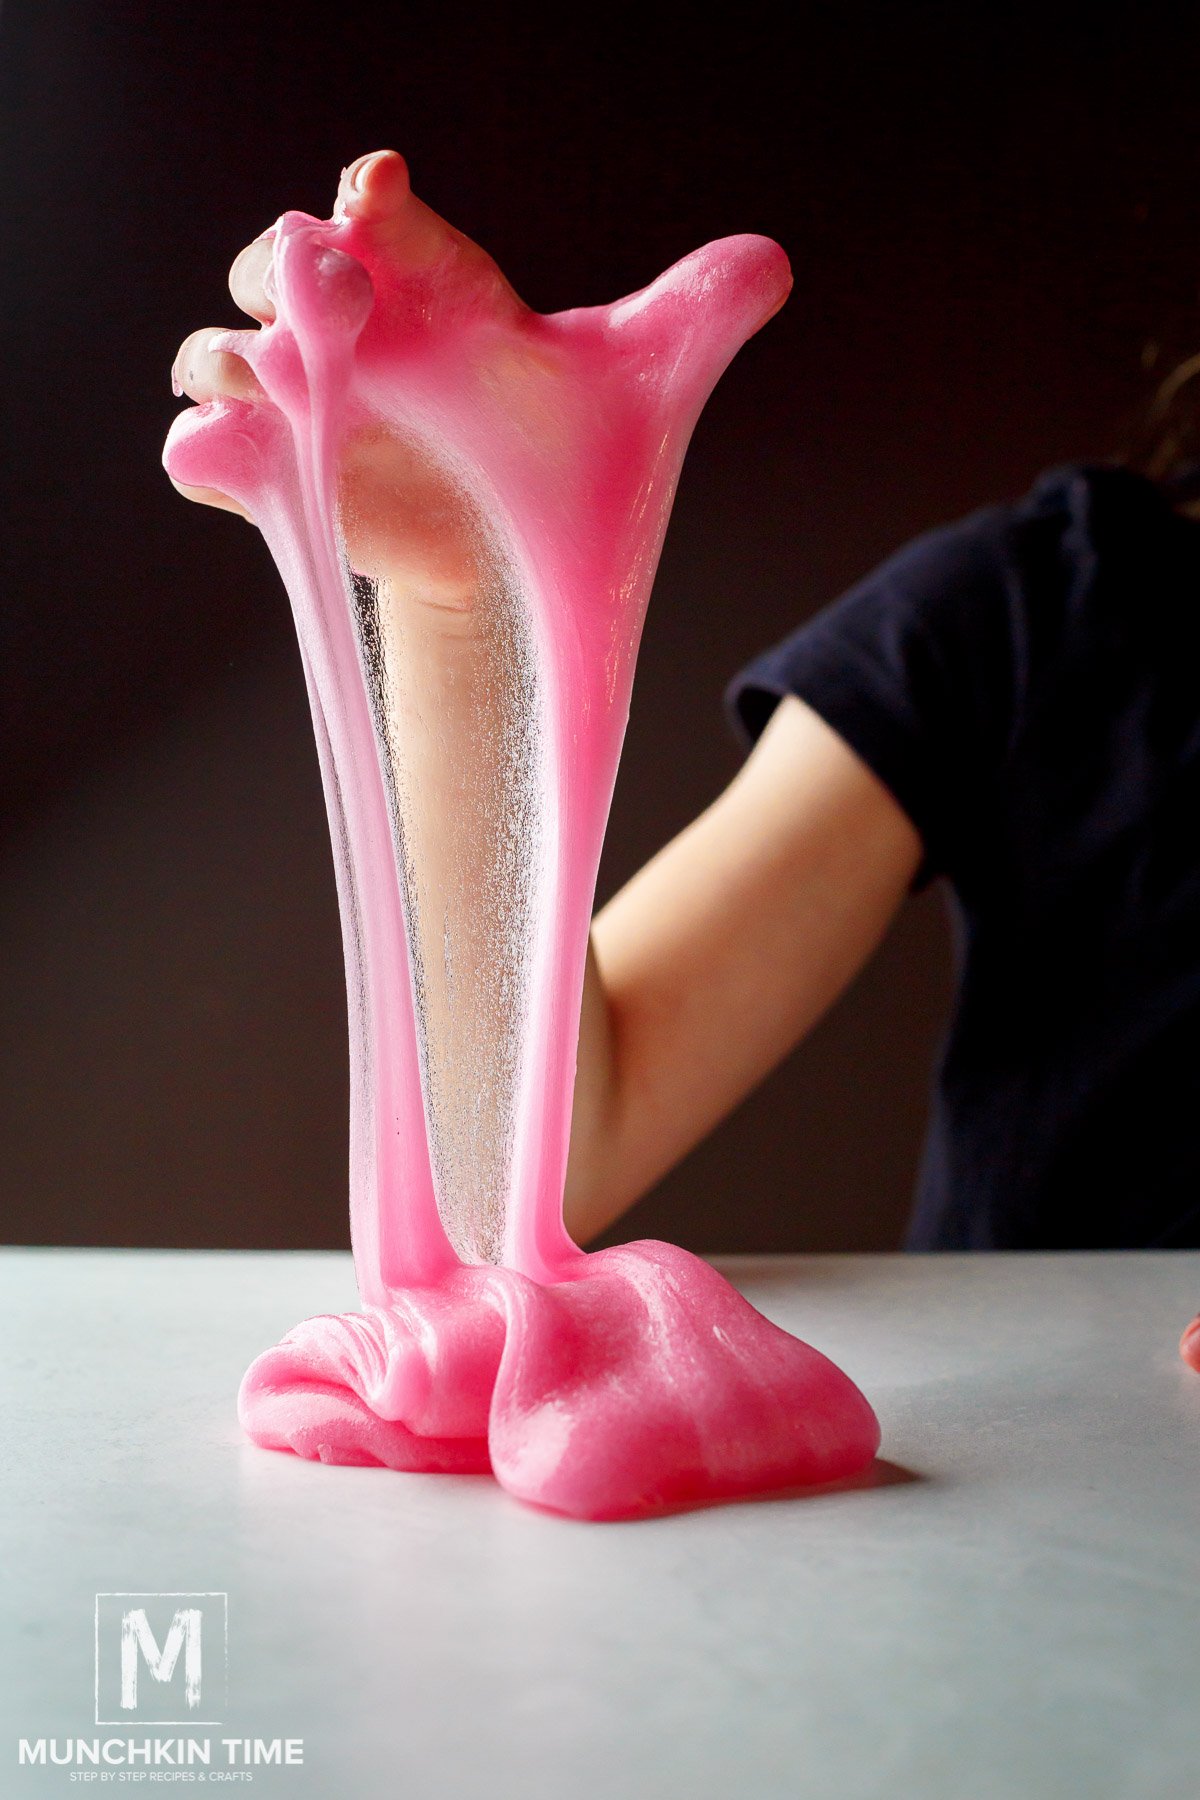 How to Make Slime With Glue and Baking Soda (Video) - Munchkin Time